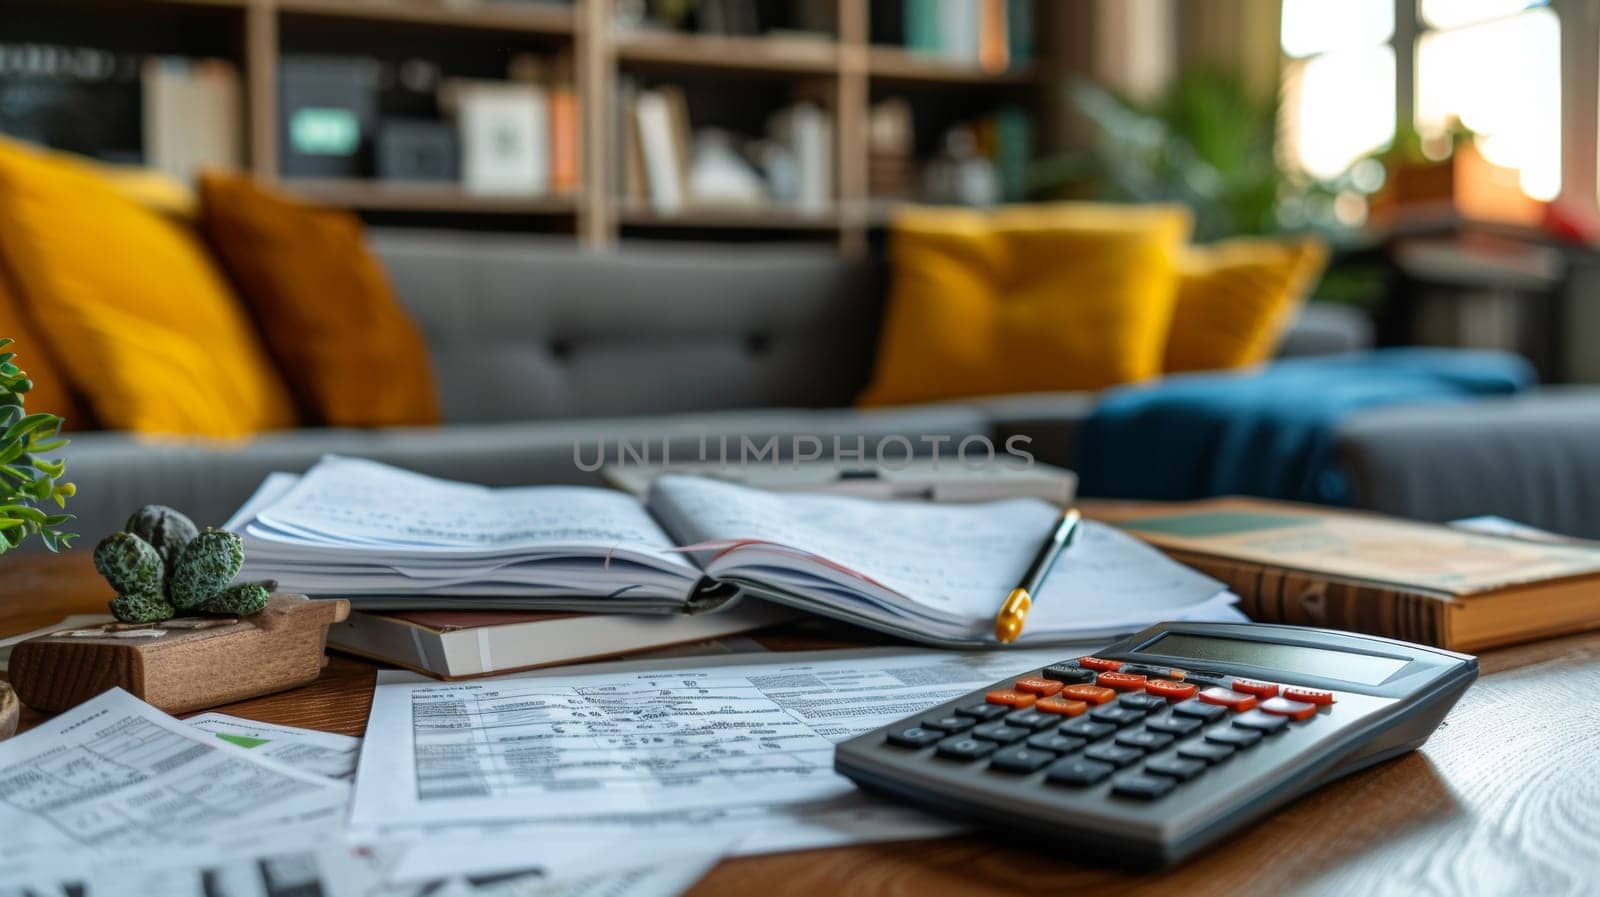 A table with a calculator, books and papers on it